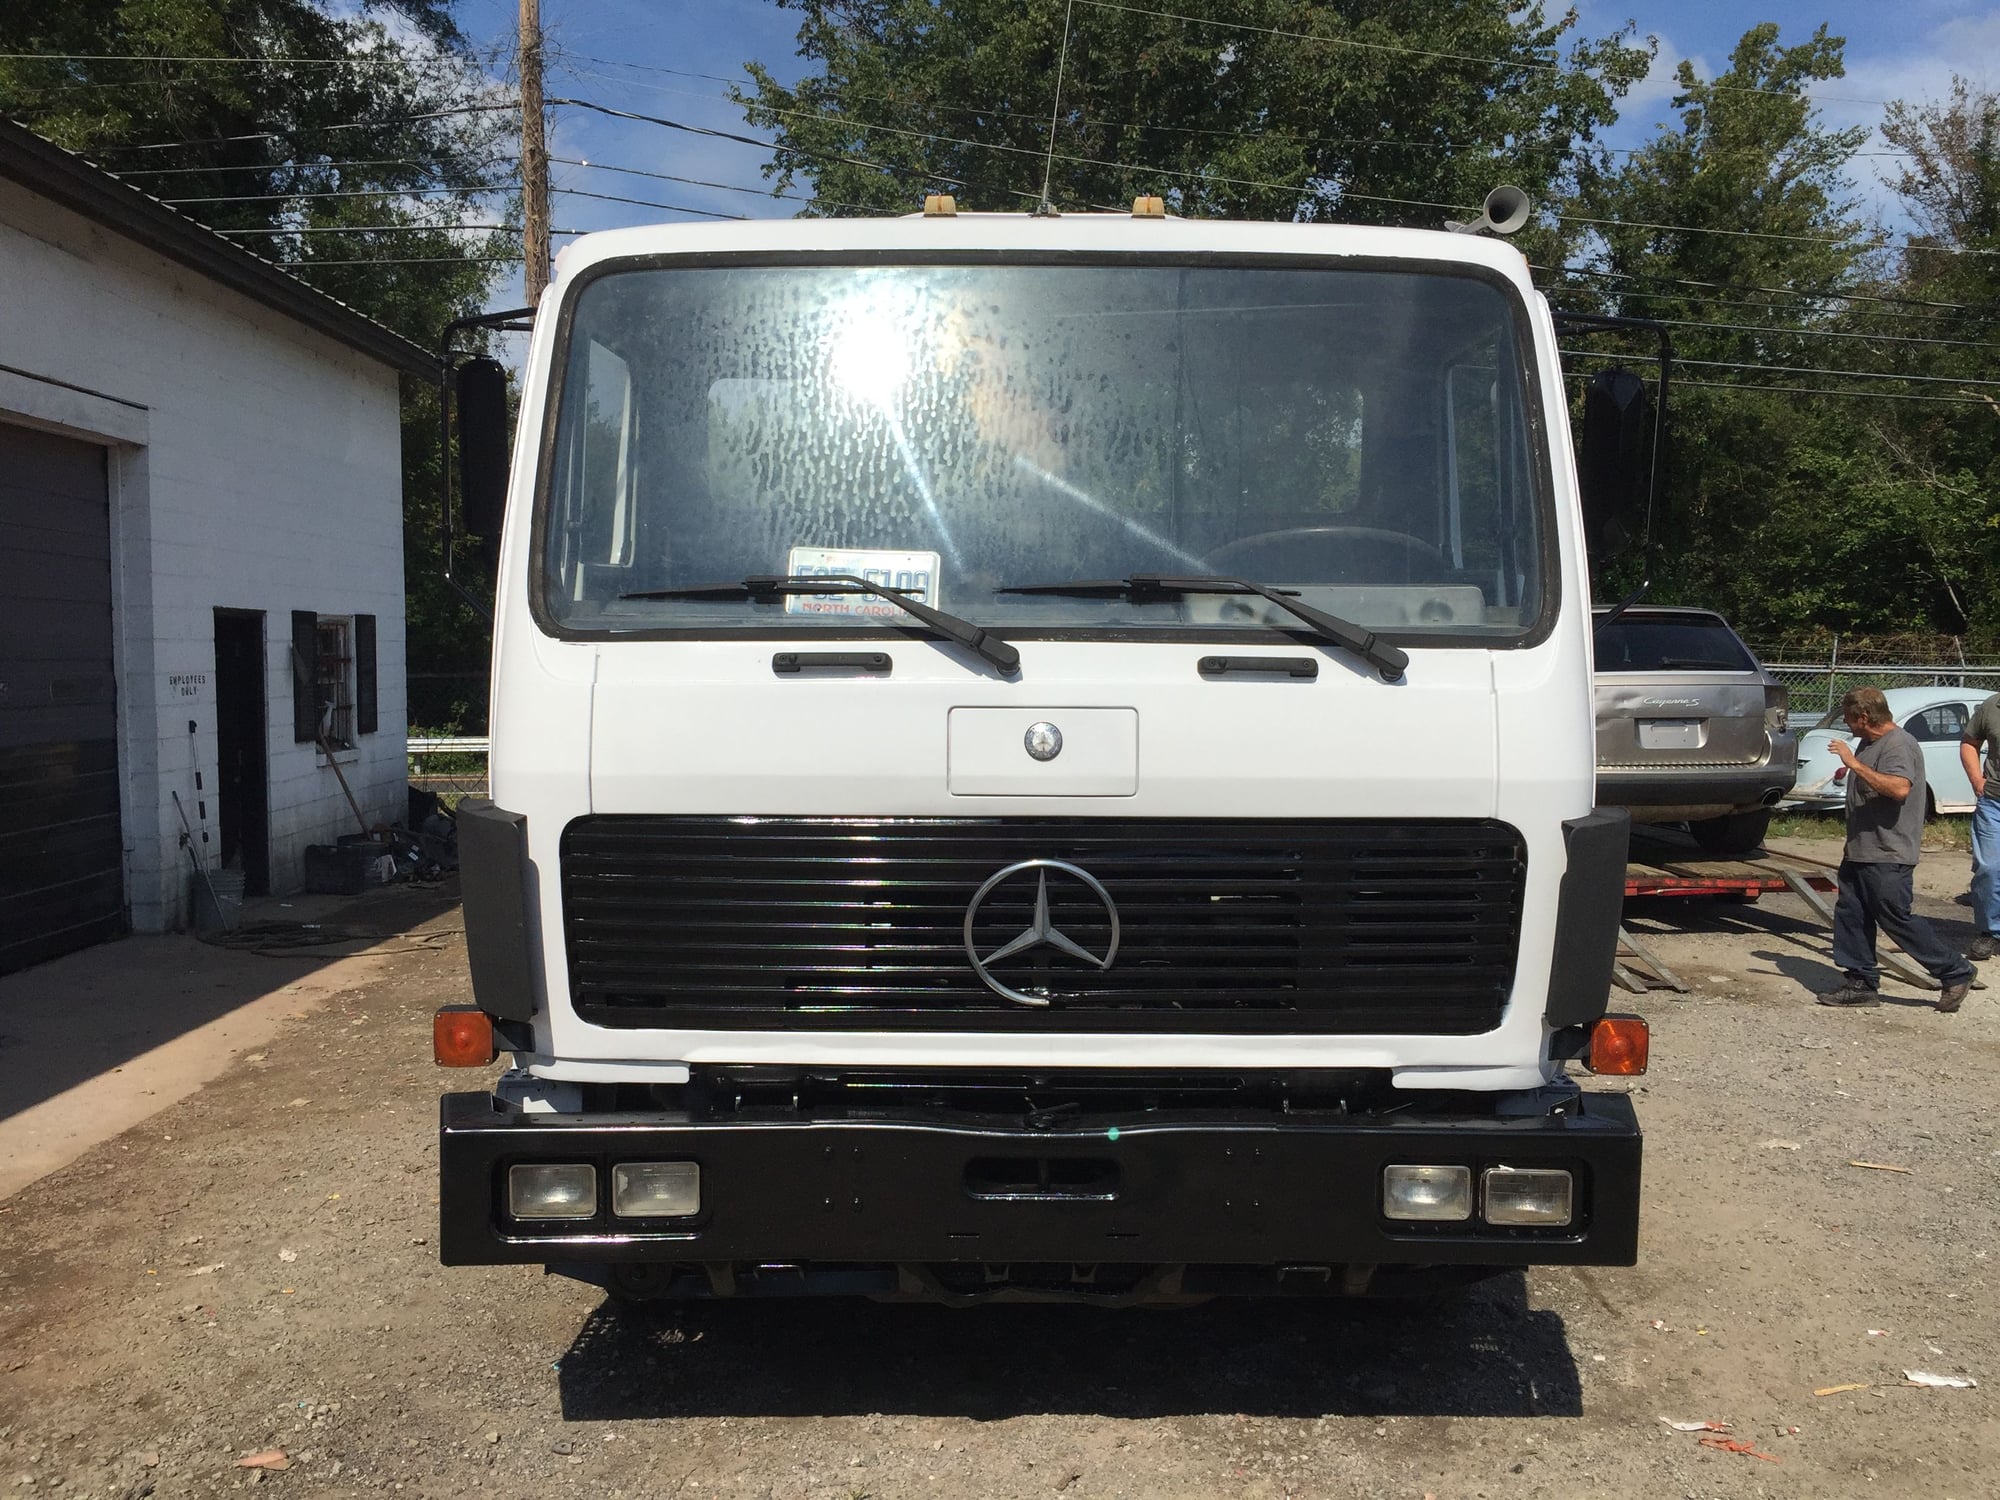 1986 Mercedes-Benz LPS1525 - 1986 Mercedes-Benz LPS1525 NG 6-SPEED TURBODIESEL UNIMOG Semi TRUCK - Used - VIN 1MBZB80A6GN800447 - 5 cyl - 2WD - Manual - Truck - White - Charlotte, NC 28104, United States